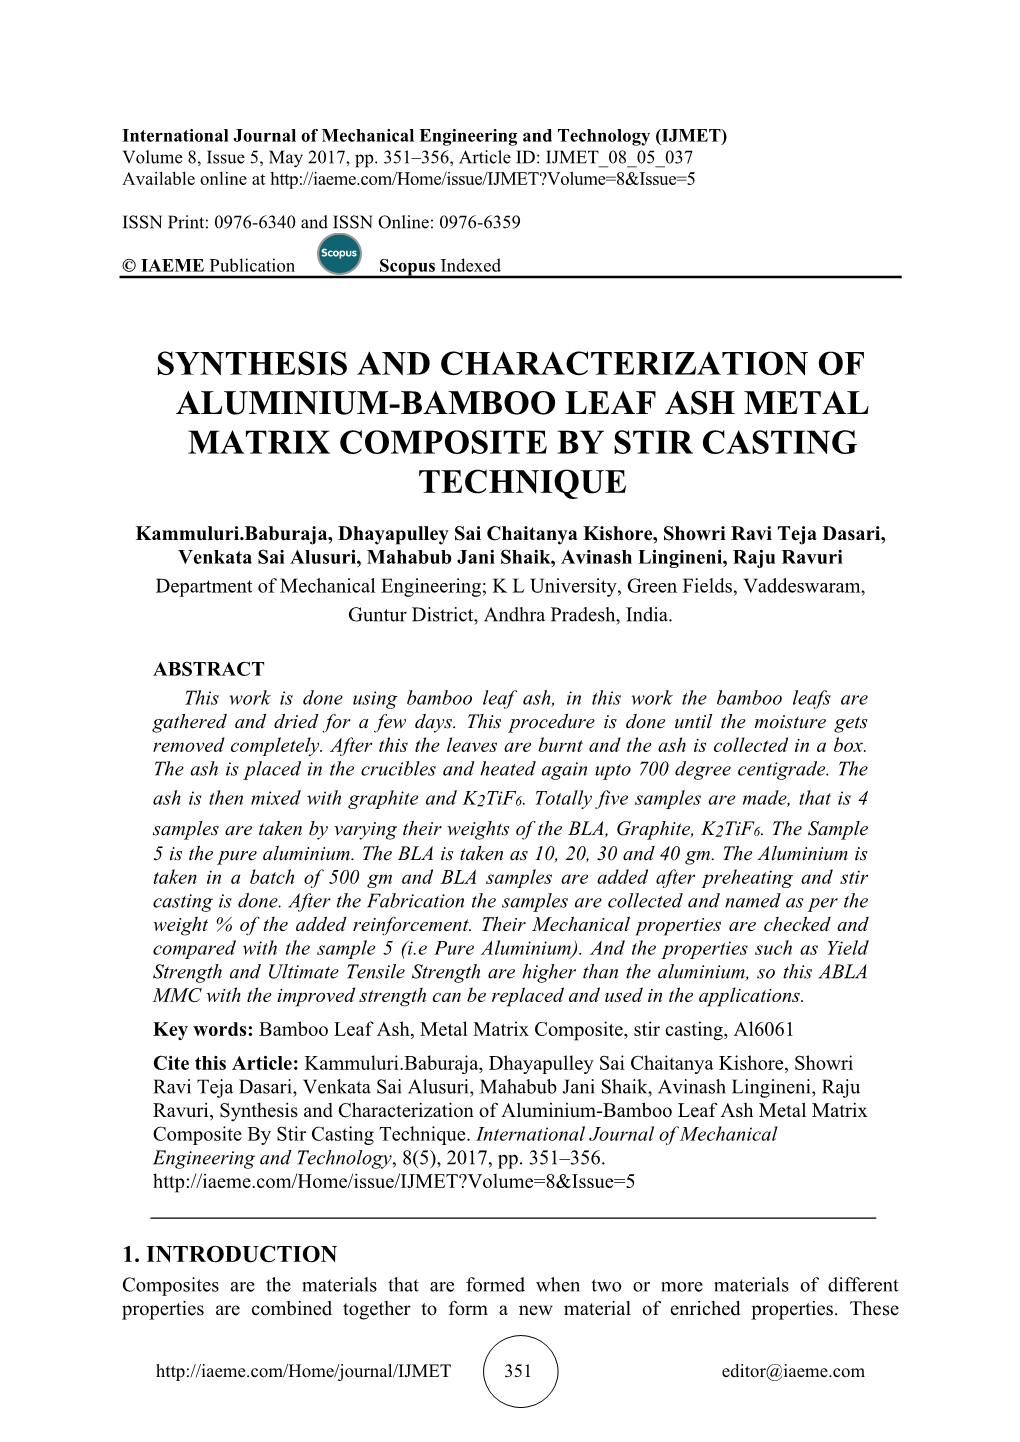 Synthesis and Characterization of Aluminium-Bamboo Leaf Ash Metal Matrix Composite by Stir Casting Technique